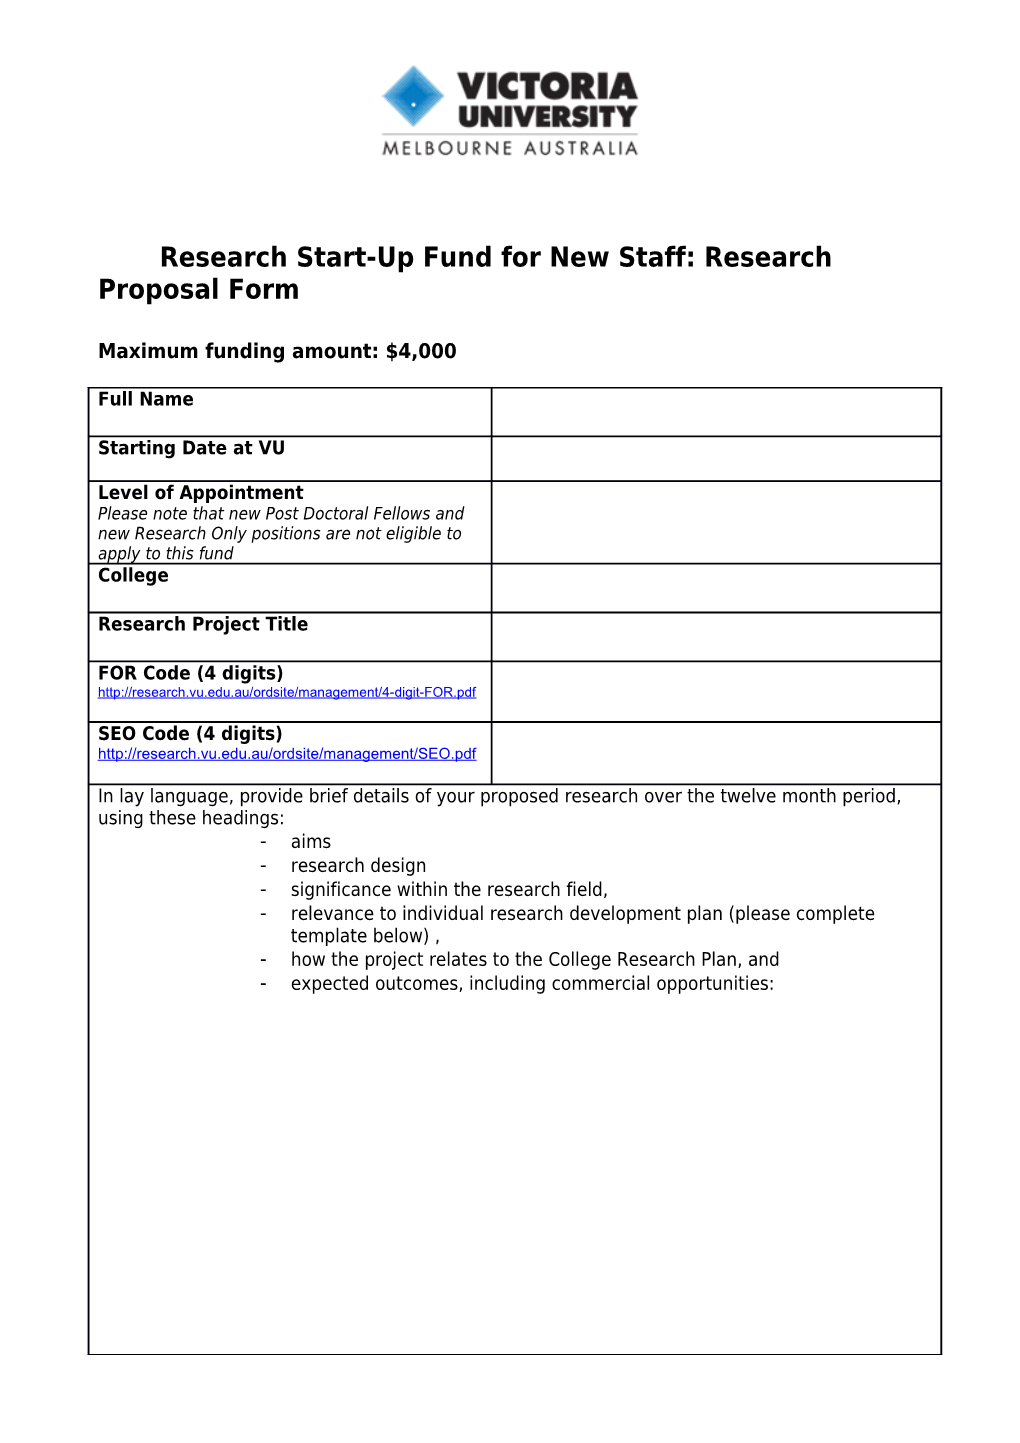 Research Start-Up Fund for New Staff: Research Proposal Form